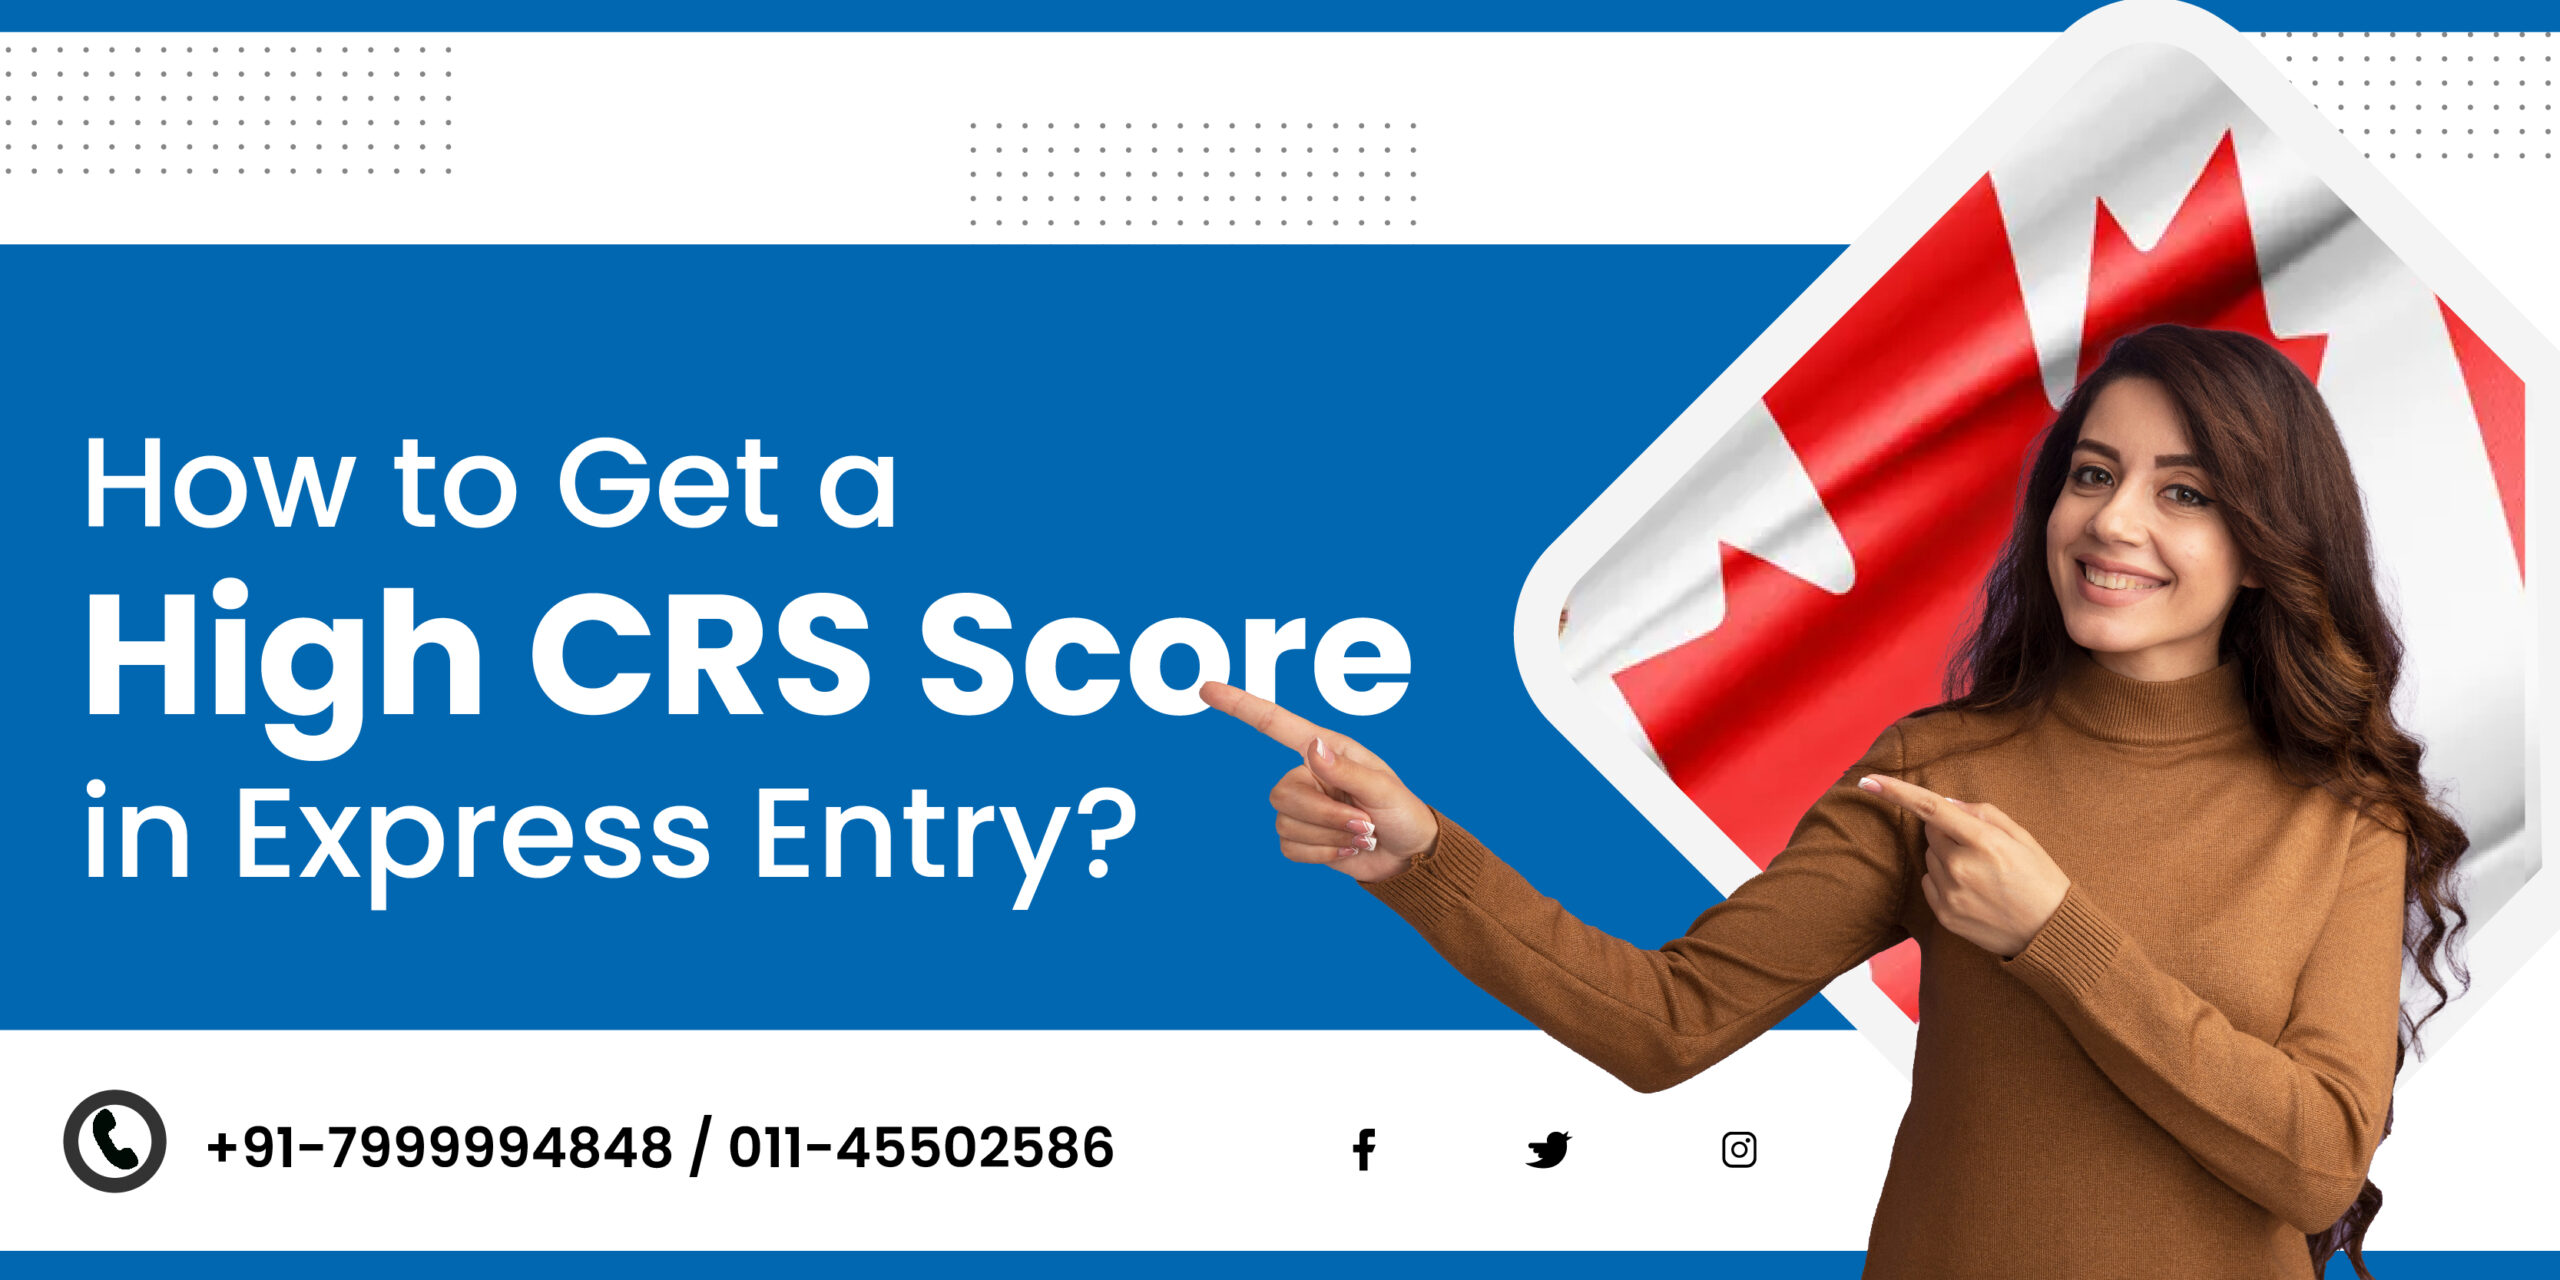 How to Get a High CRS Score in Express Entry